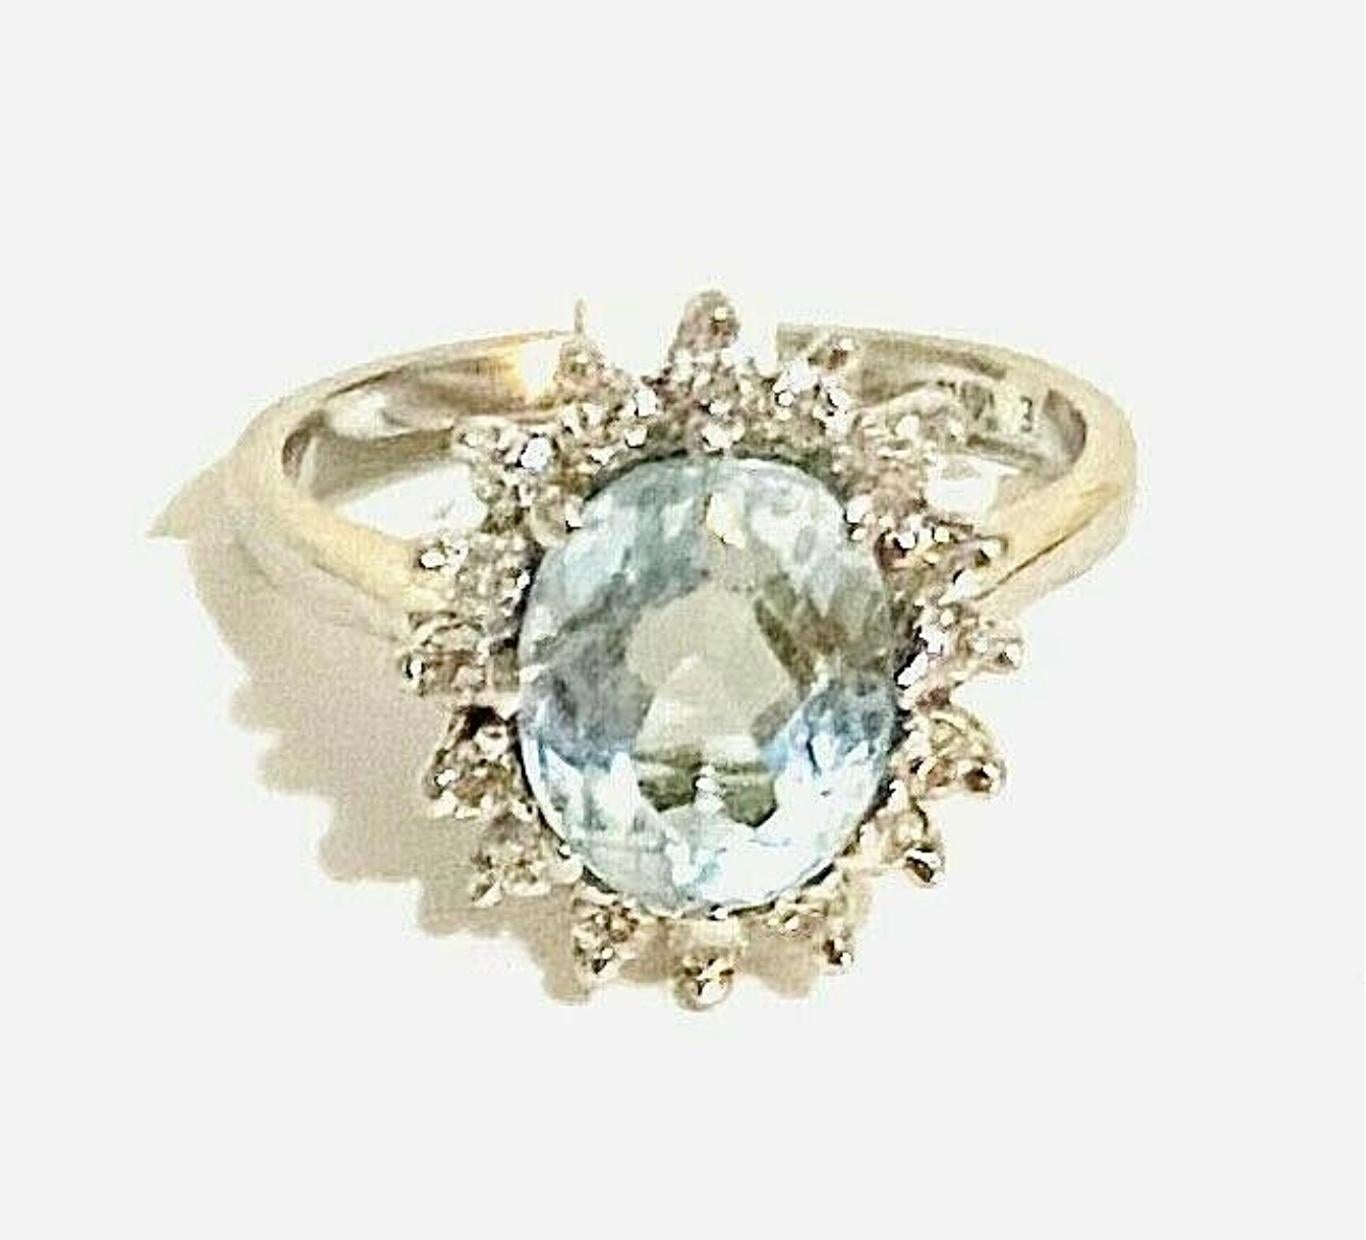 14k white gold aquamarine ring. The dimensions are approximately 10.5 mm x 7 mm. Approximately 2 carats.
Marked 14k. Approximate size 6.5